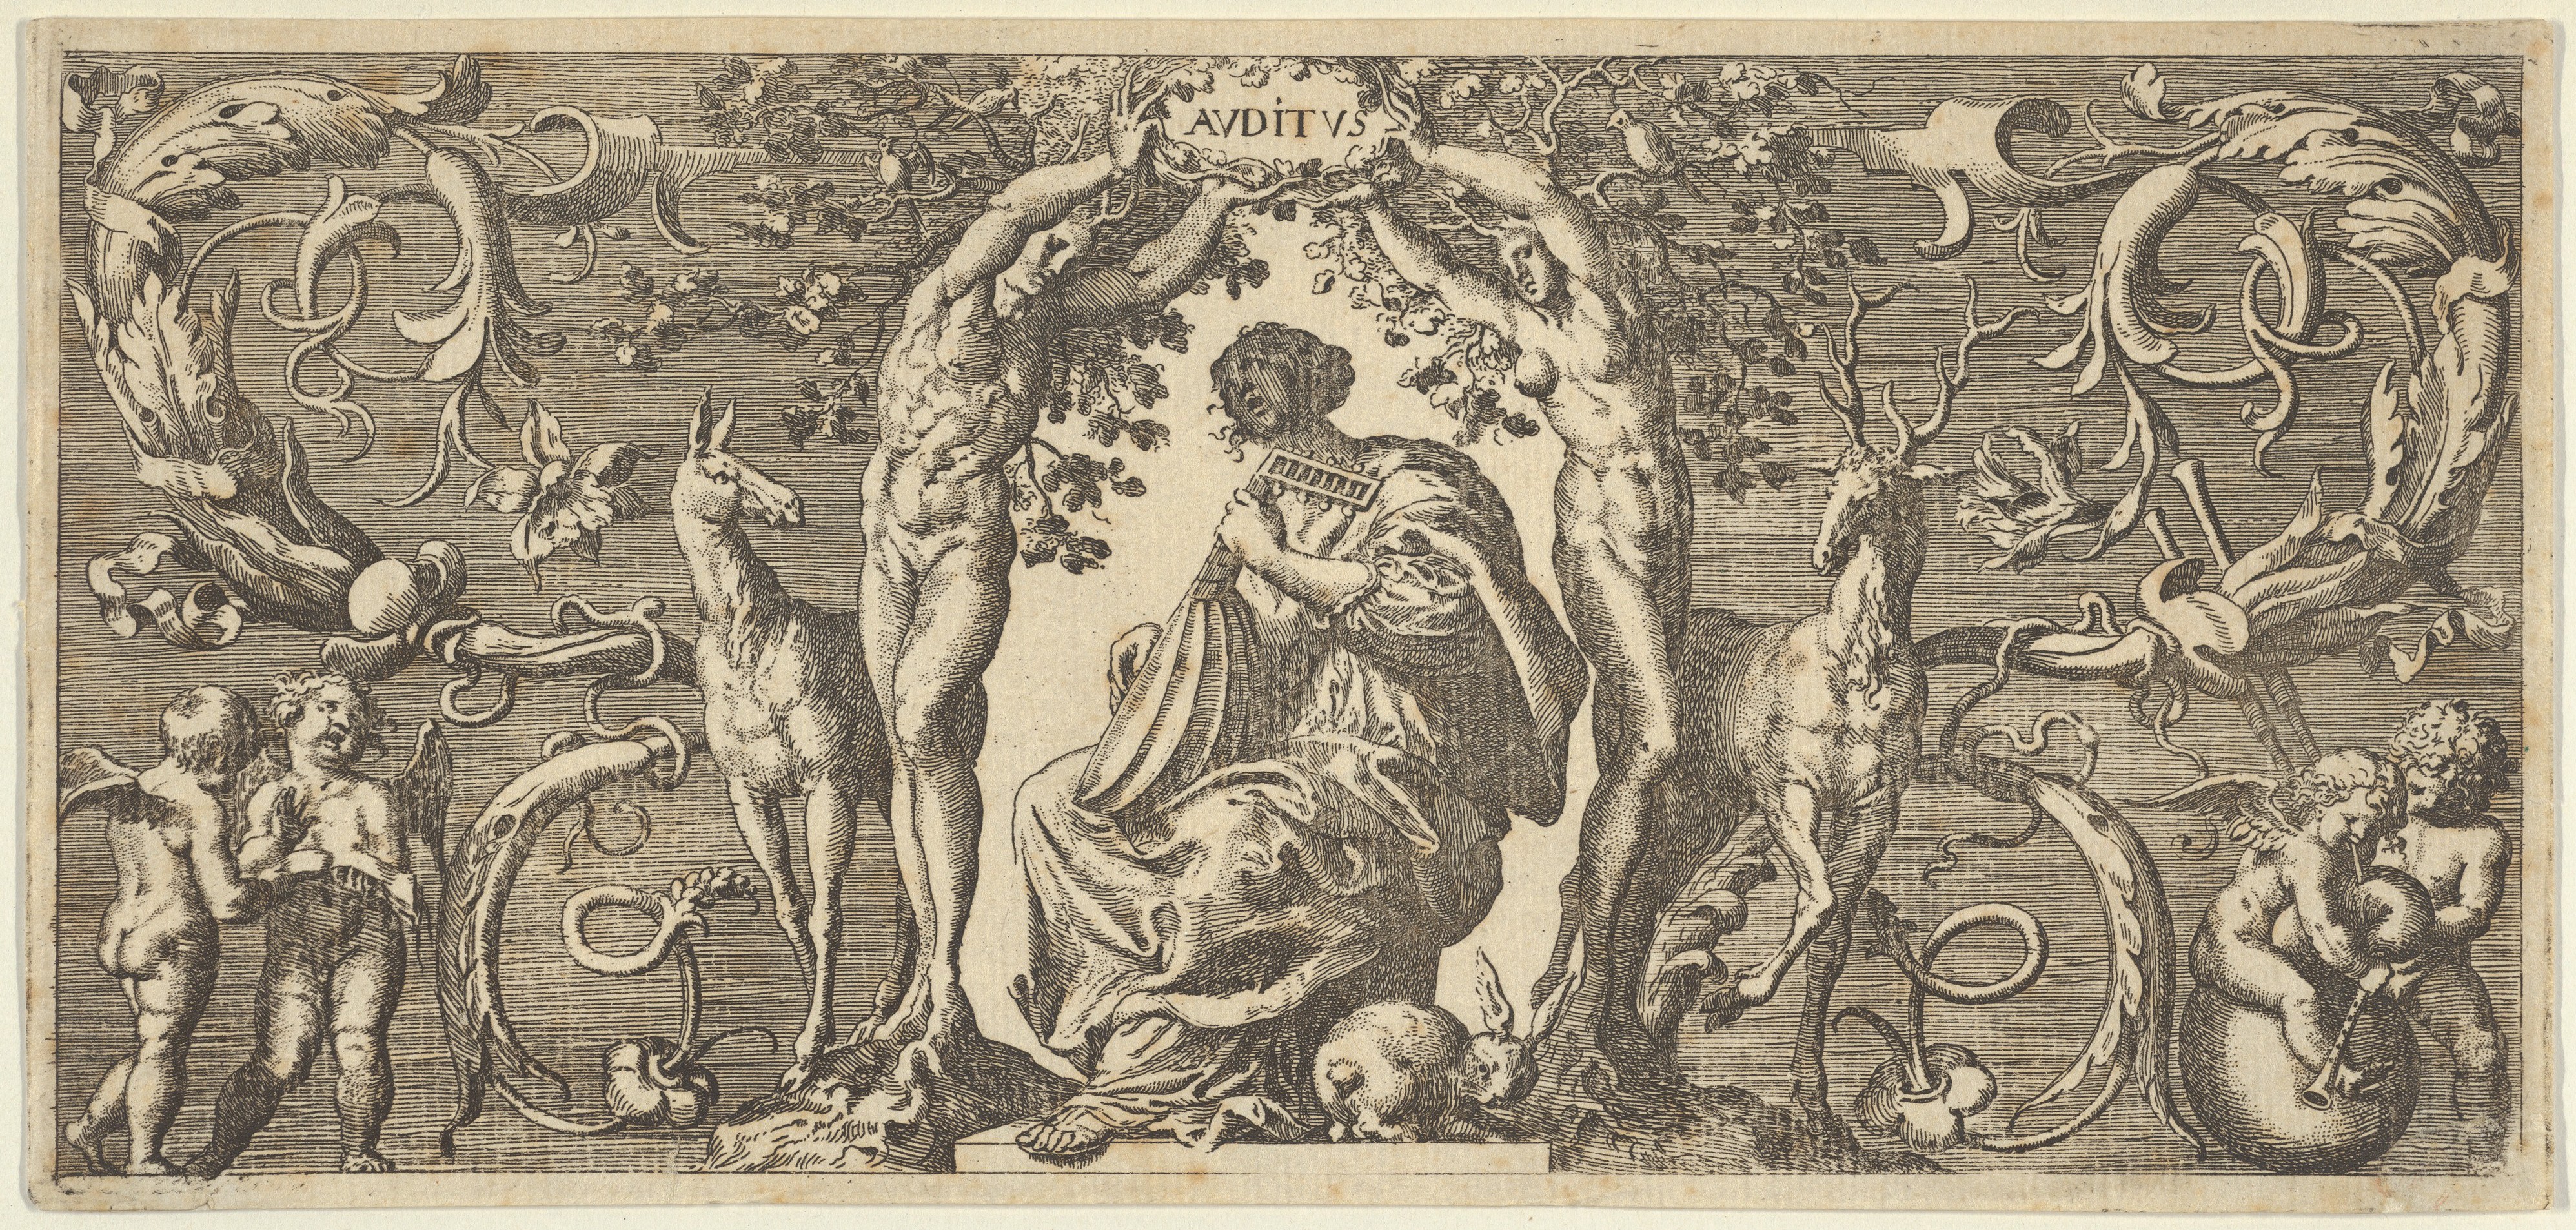 Franz Cleyn (German, Rostock 1582–1658 London)
Taste (Gustus), from Quinque Sensuum, ca. 1655
British, 
Engraving; Sheet: 3 11/16 × 7 15/16 in. (9.4 × 20.2 cm)
The Metropolitan Museum of Art, New York, Harris Brisbane Dick Fund, 1945 (45.101.3)
http://www.metmuseum.org/Collections/search-the-collections/425782